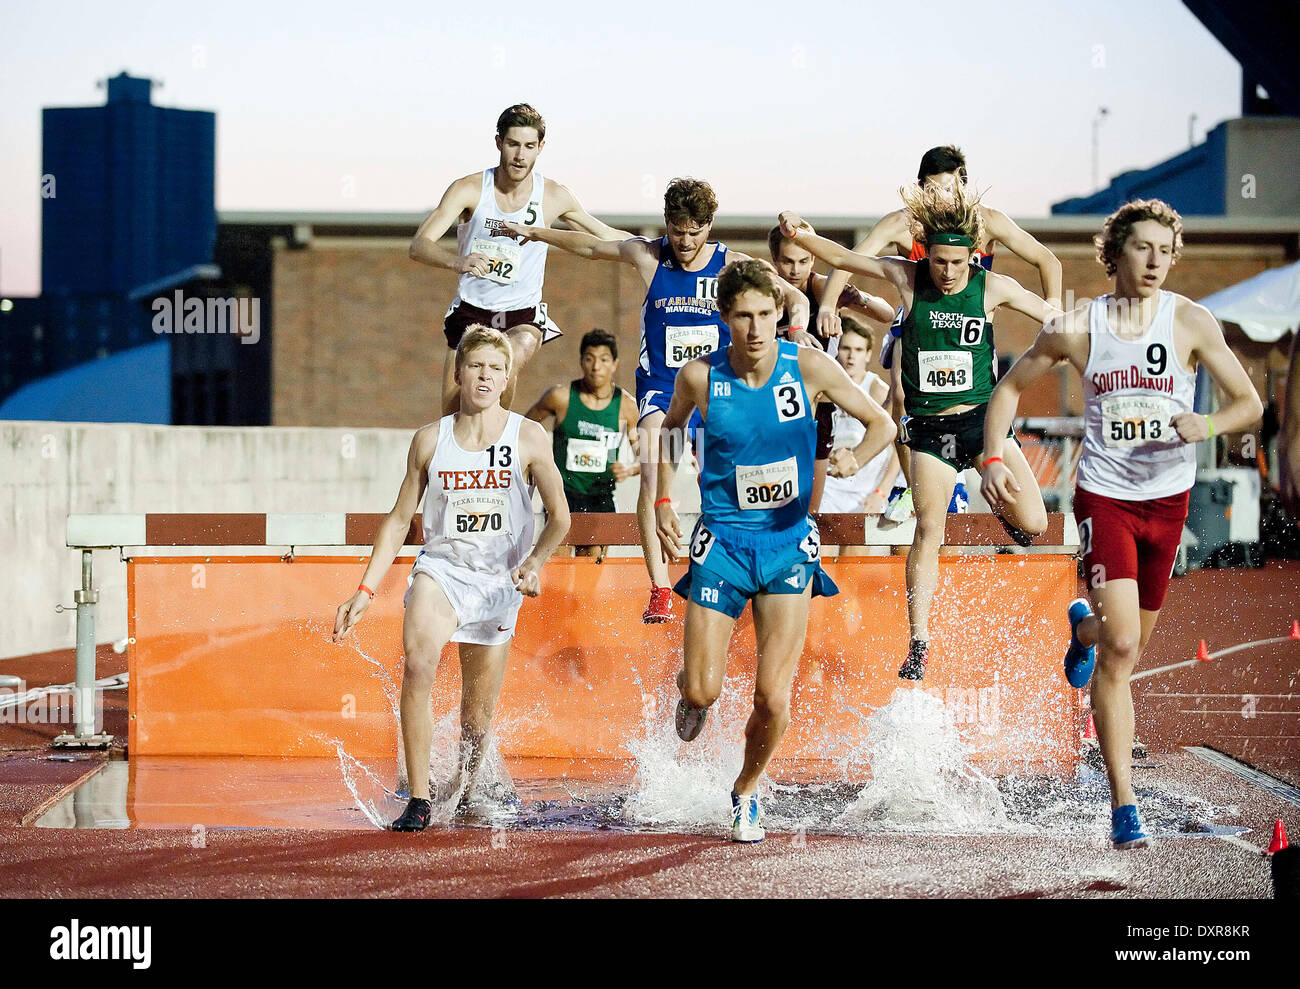 Austin, Texas, USA. 27th Mar, 2014. March 27, 2014: Men's 3000 Meter Steeplechase at The 87th Clyde Littlefield Texas Relays at Mike A. Myers Stadium, Austin, Texas. Credit:  csm/Alamy Live News Stock Photo